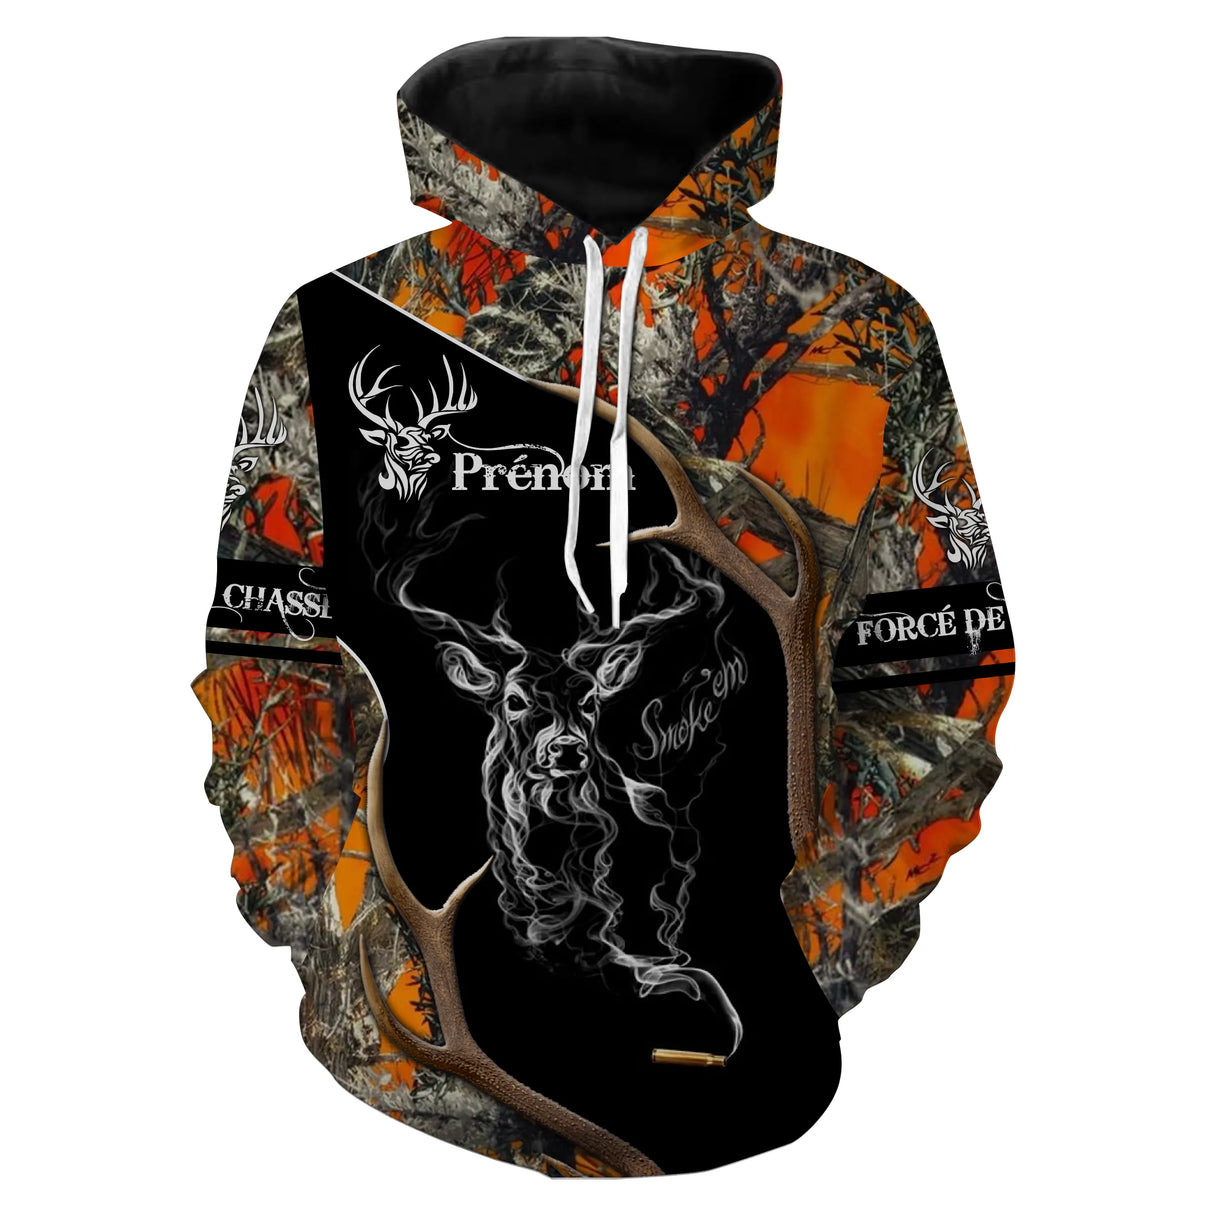 Fall Camouflage Deer Hunting, Personalized Hunter Humor Gift - CT08092223